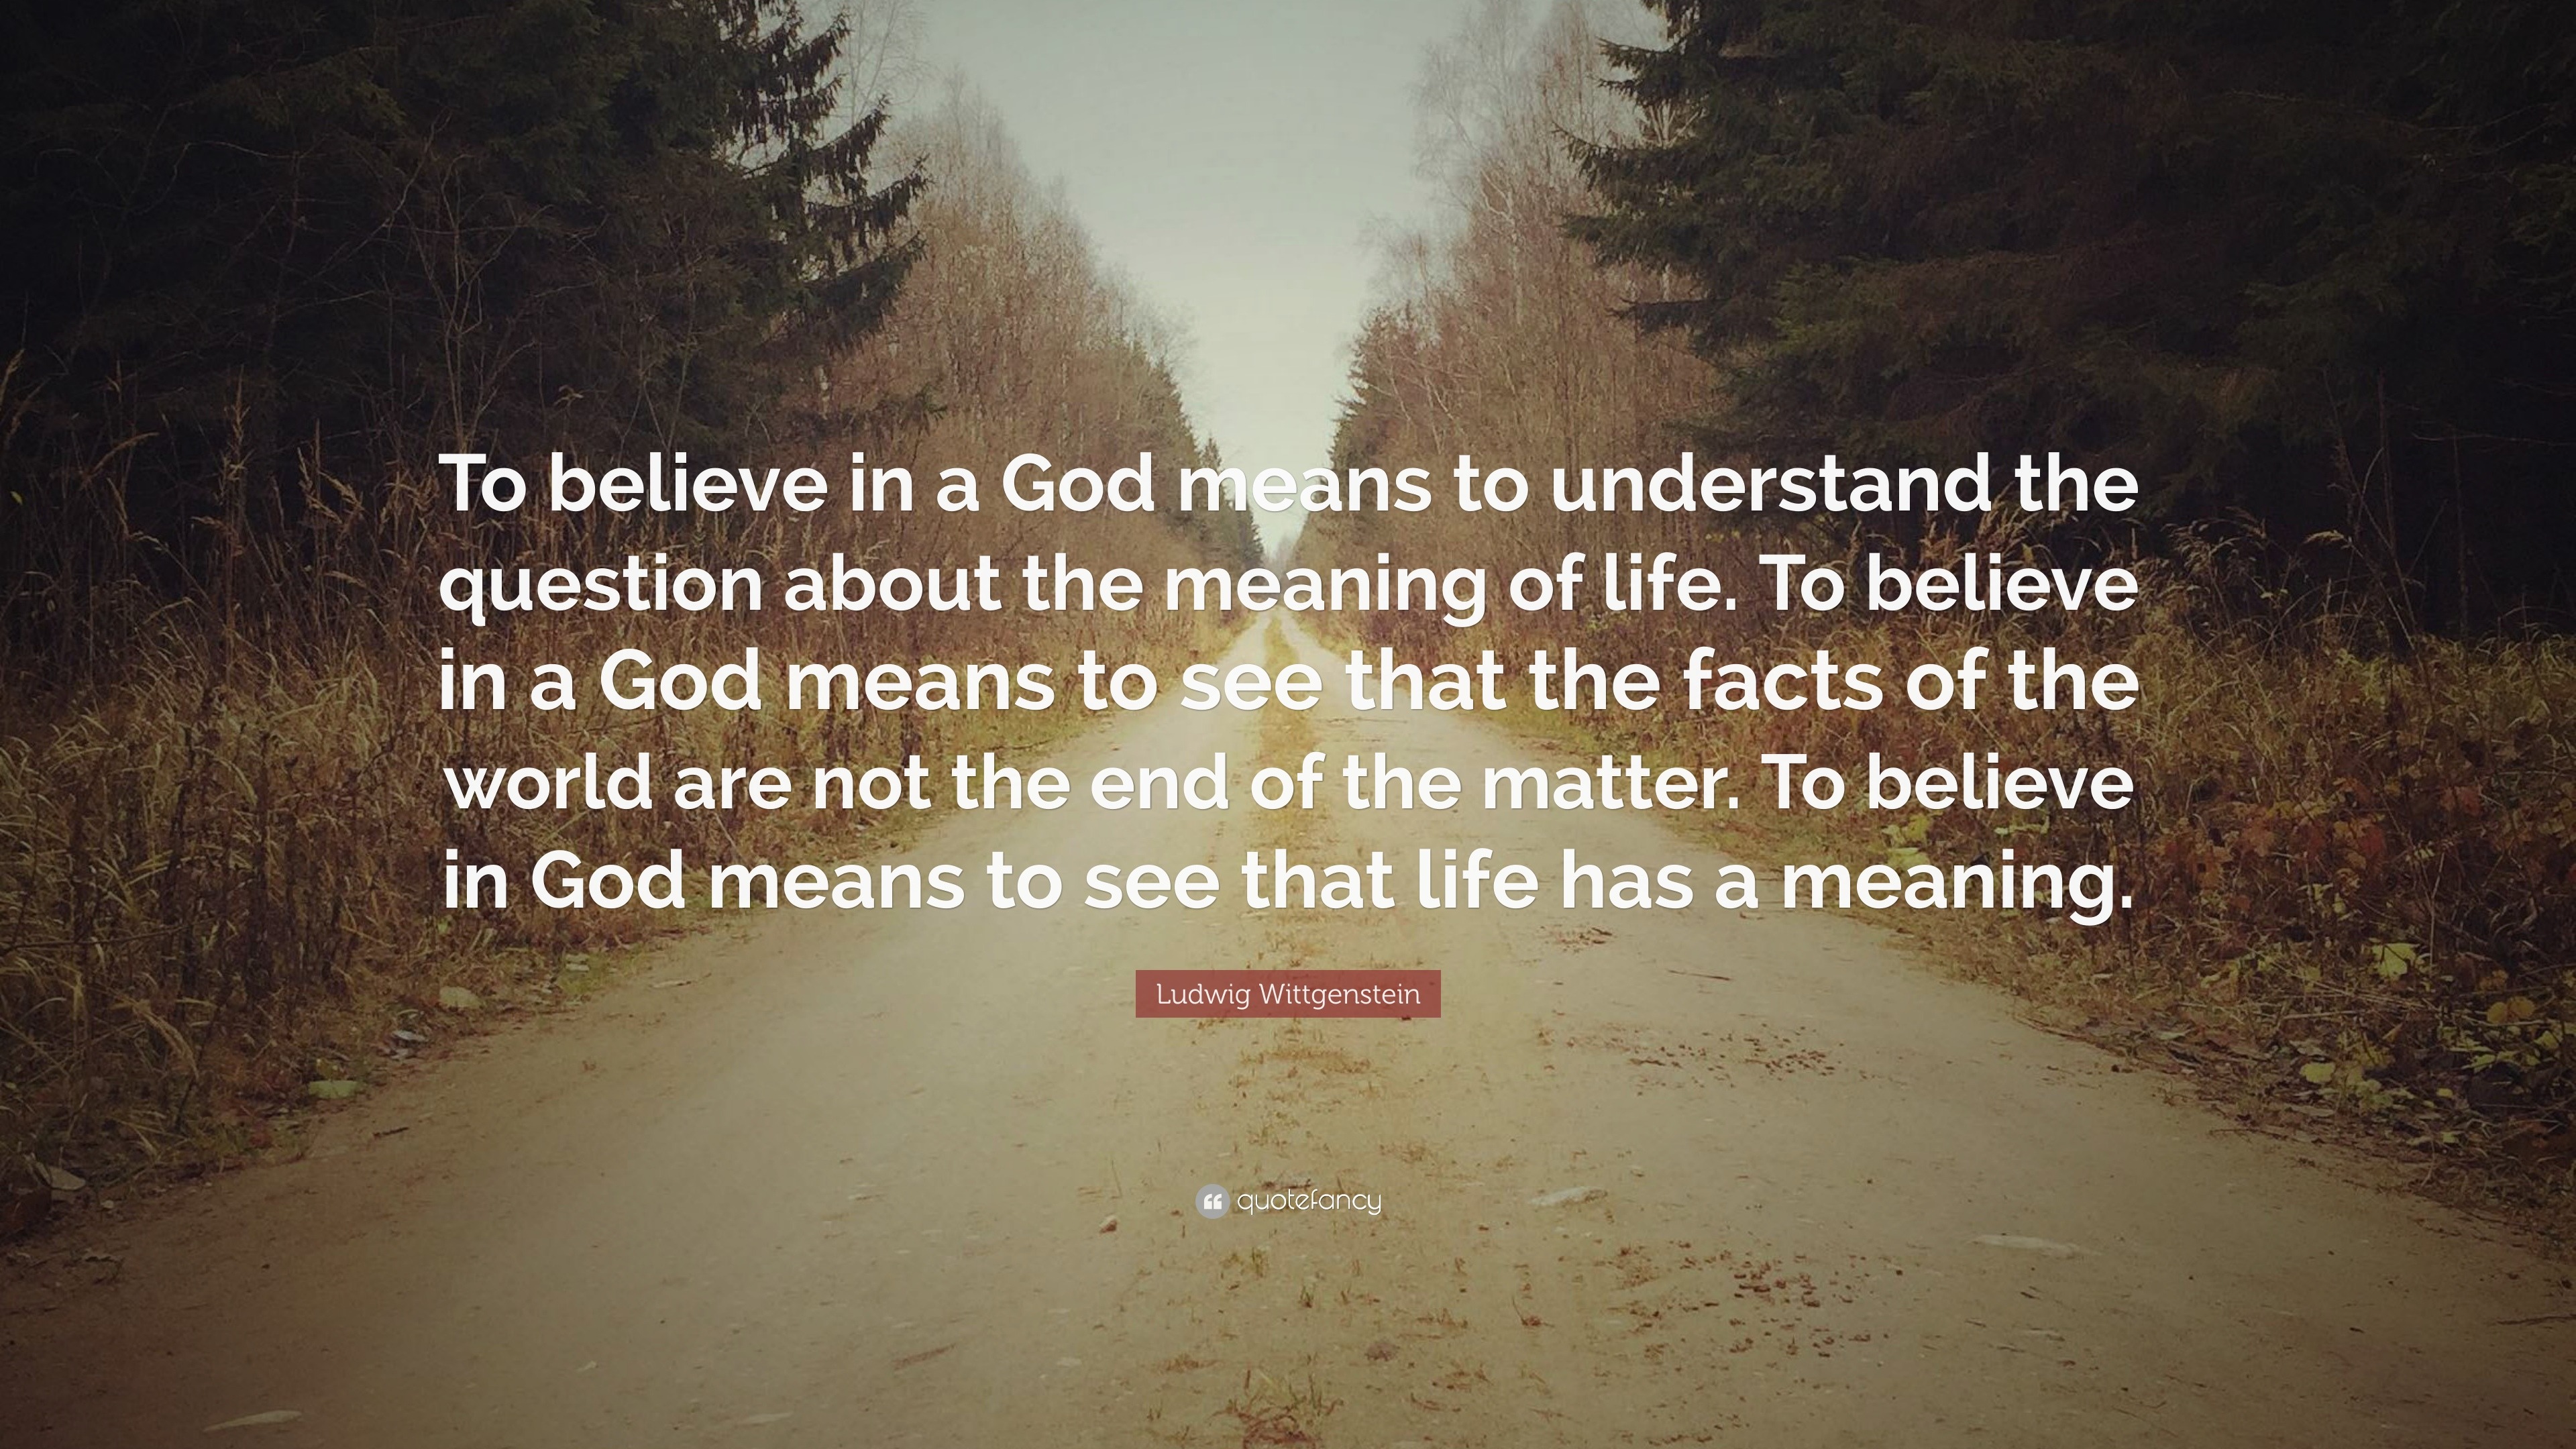 Ludwig Wittgenstein Quote: “To believe in a God means to understand the ...